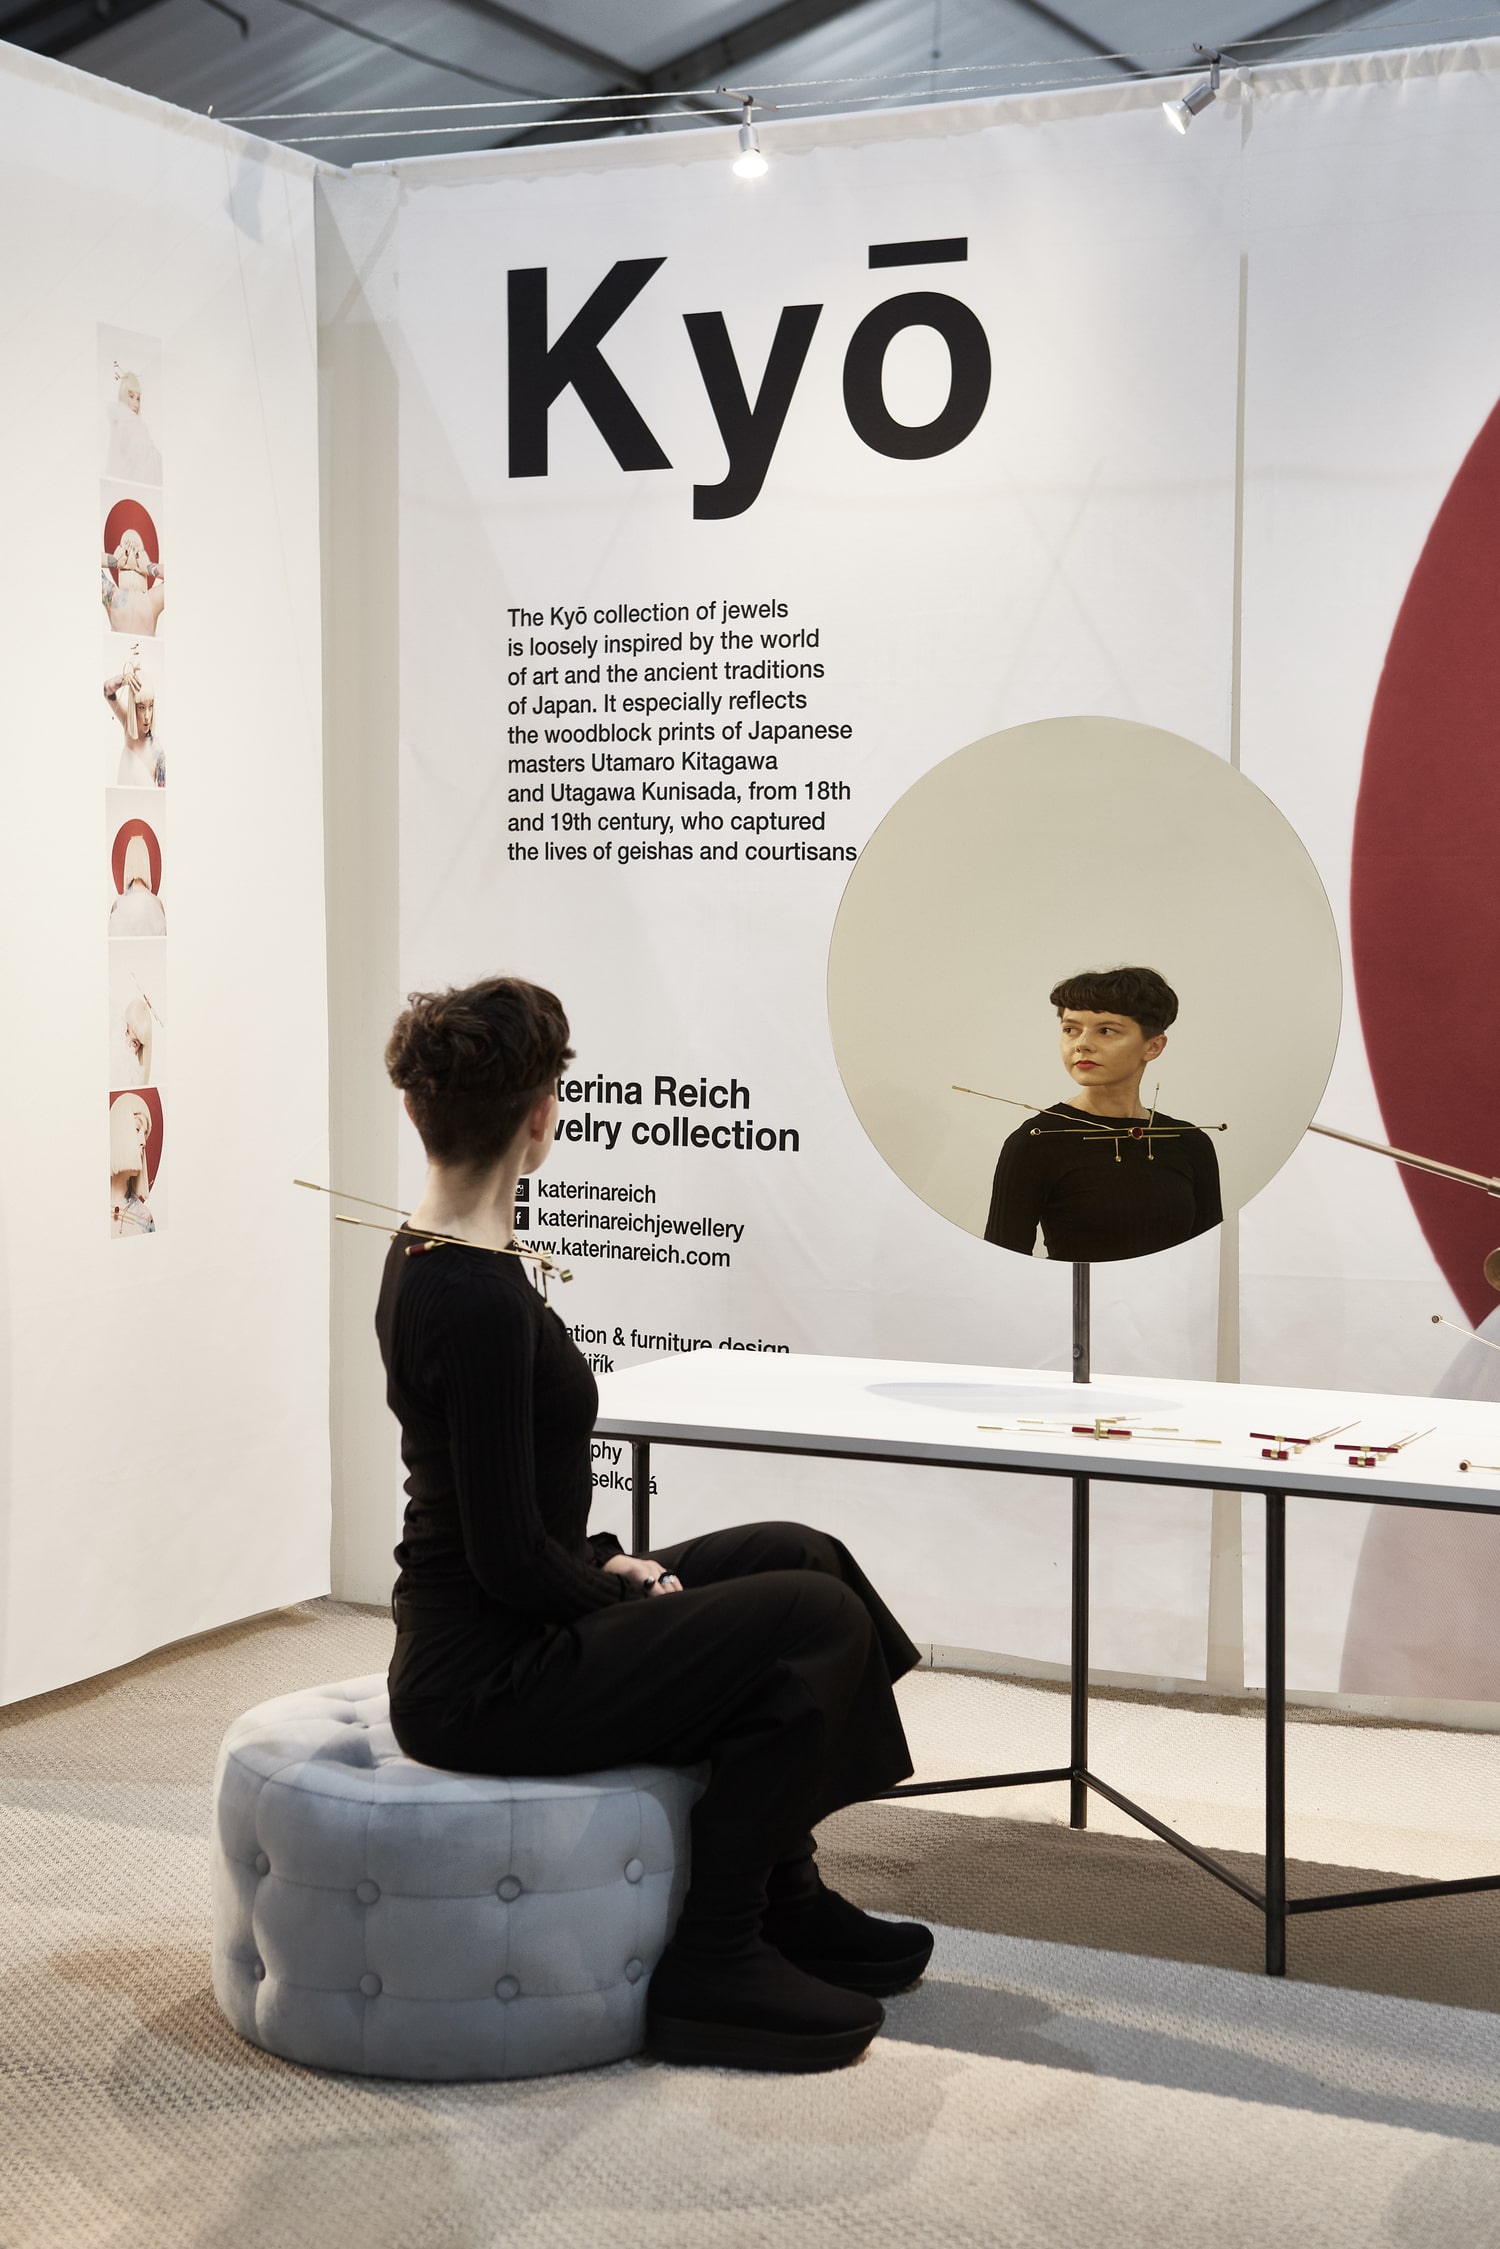 The Kyō collection